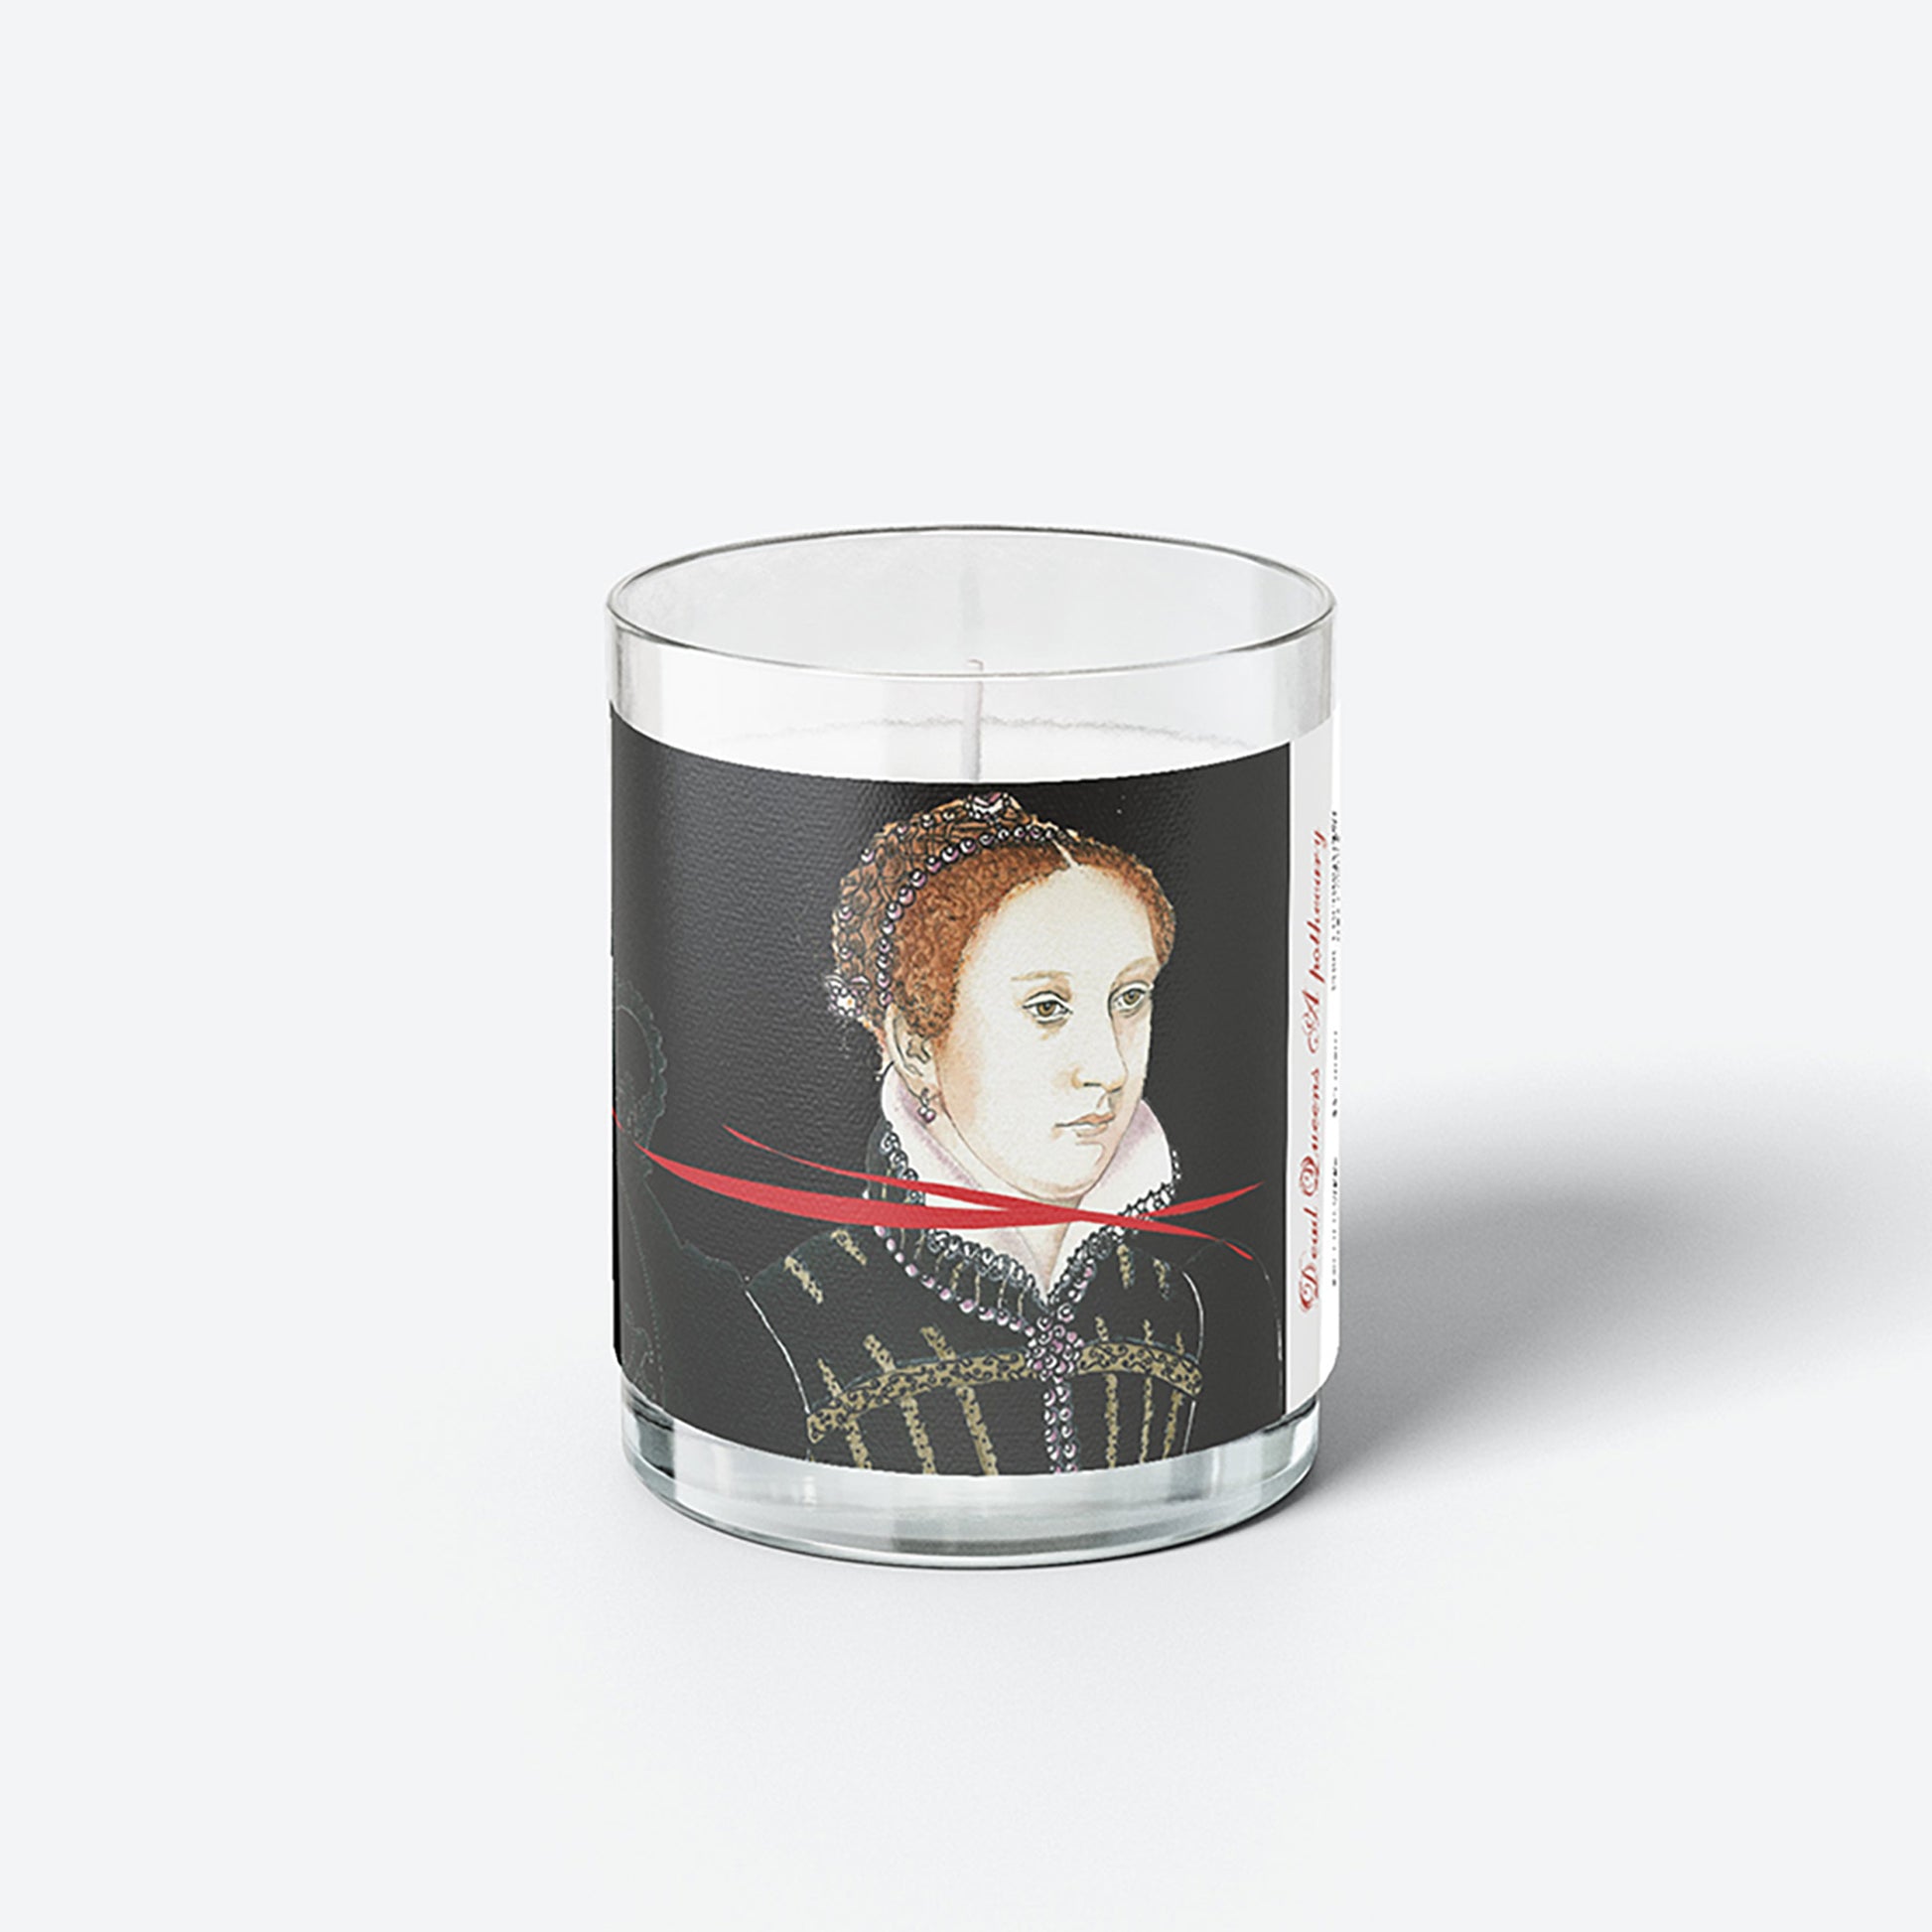 Mary Queen of Scots English Rose Candle - Dead Queens